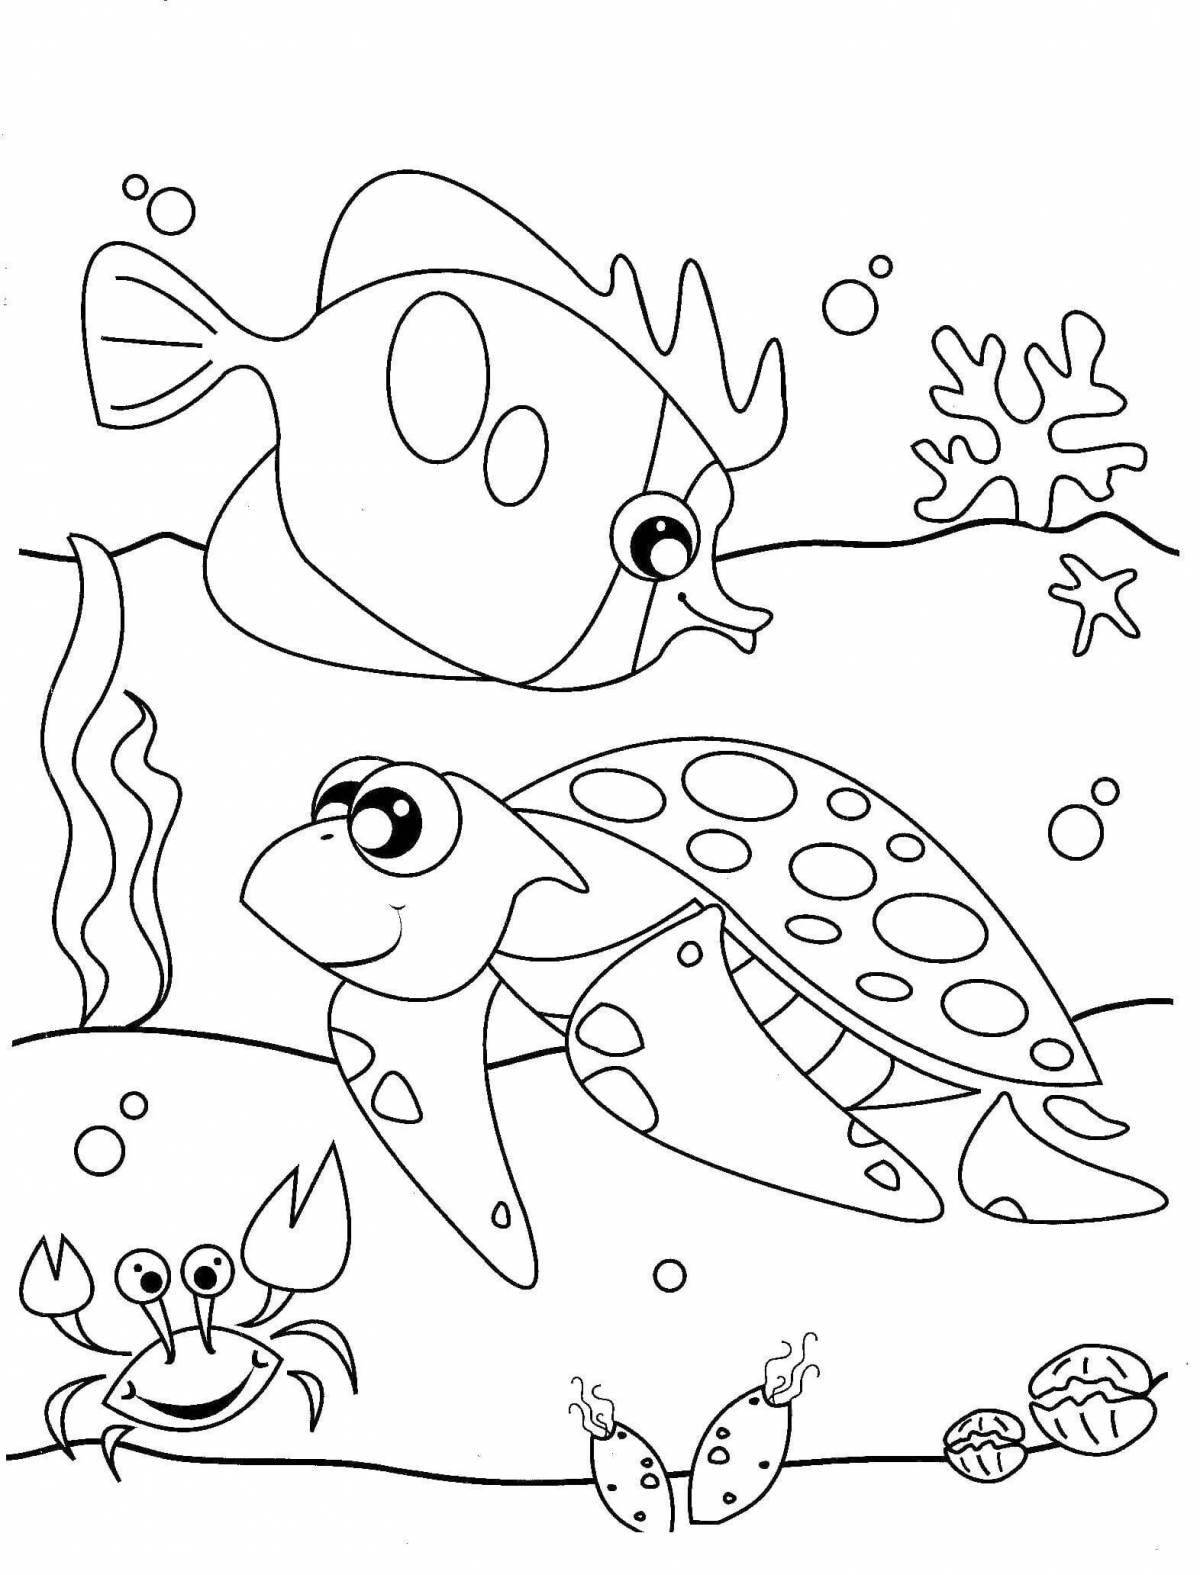 Fun sea life coloring book for 5-6 year olds